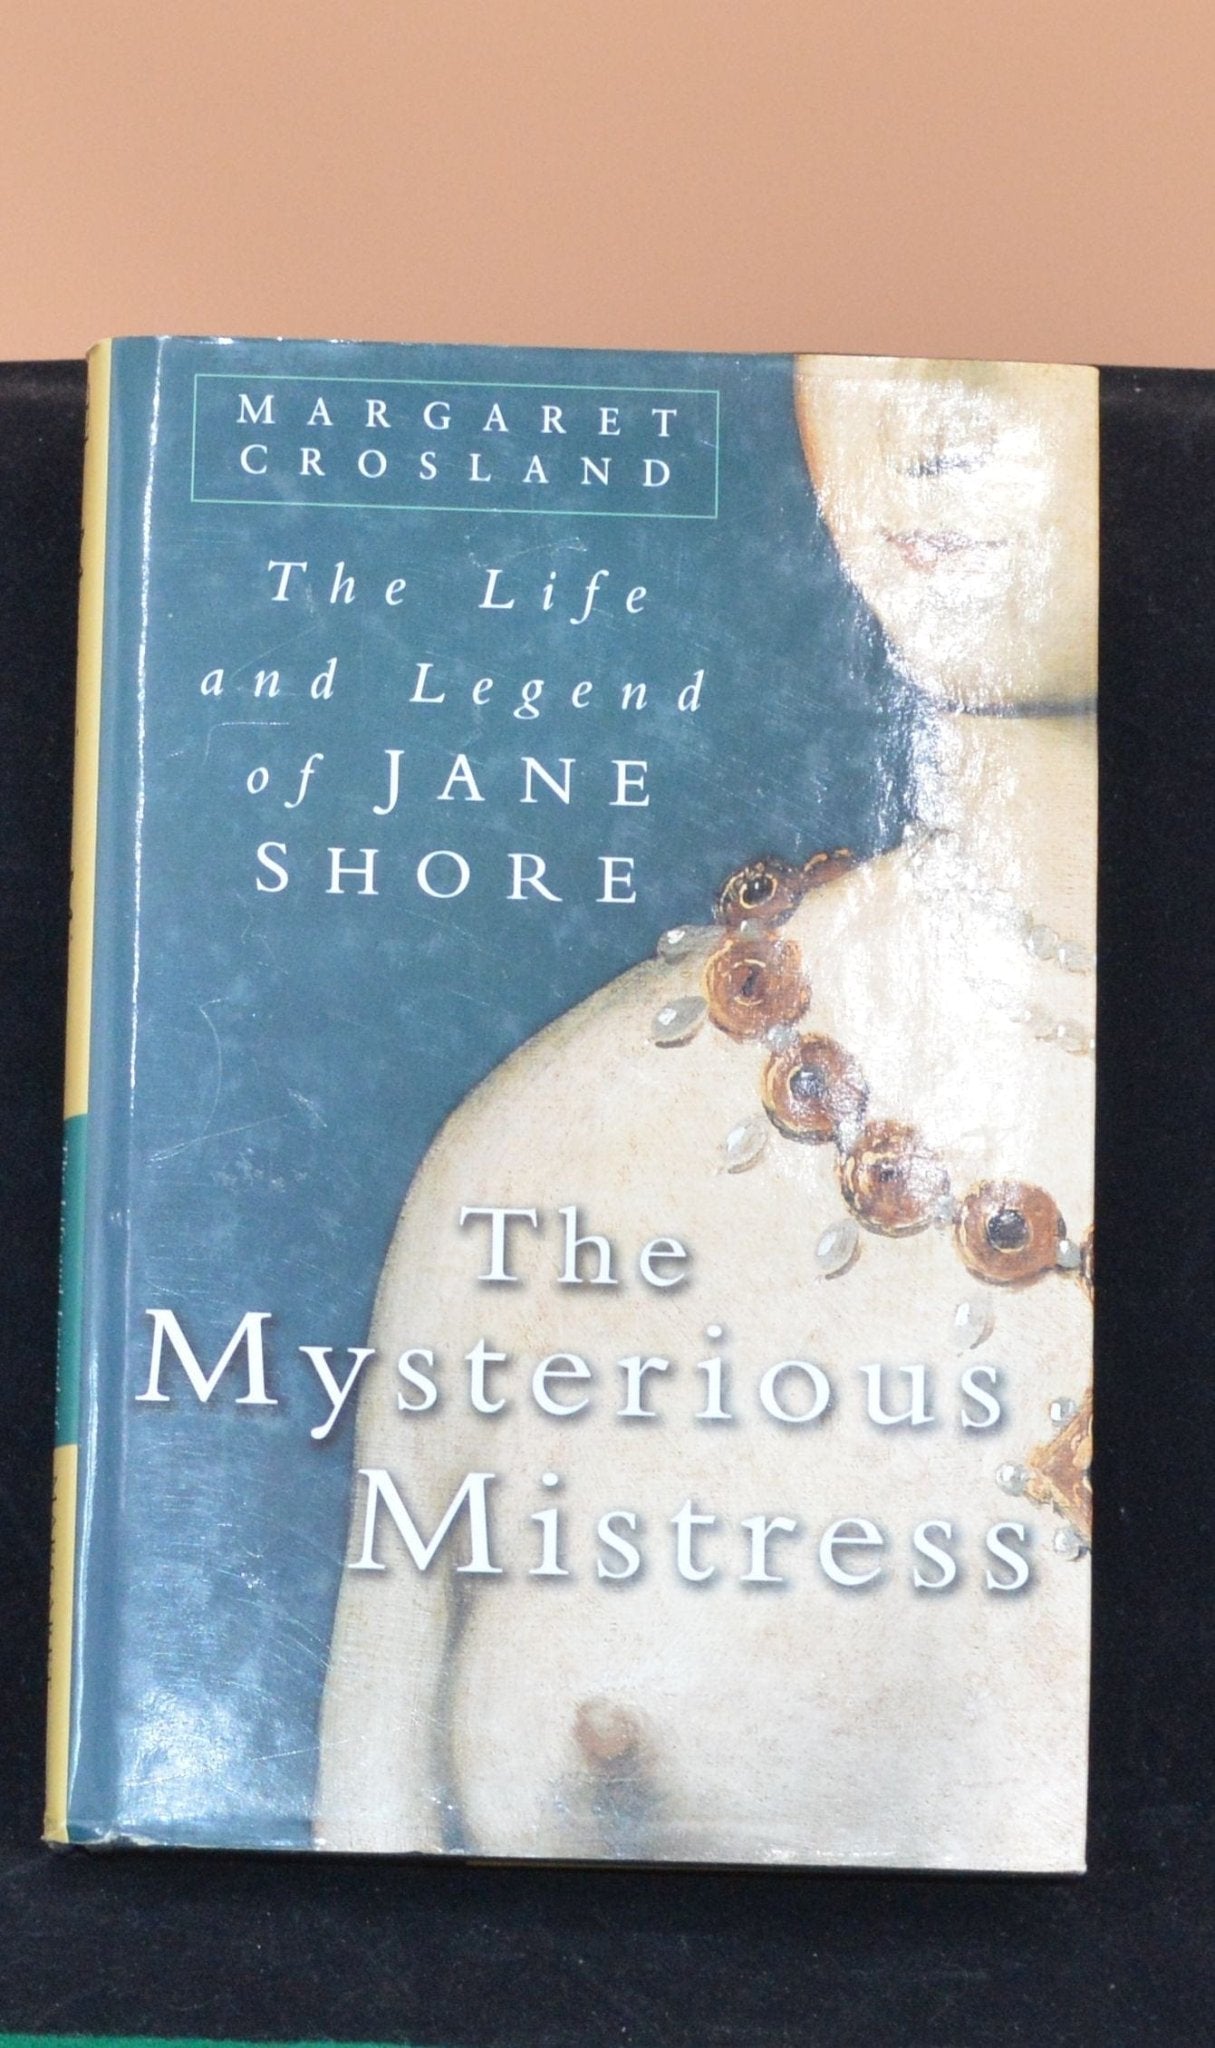 SECONDHAND BOOK THE LIFE & LEGEND OF JANE SHORE by MARGARET CROSLAND GOOD CONDITION - TMD167207